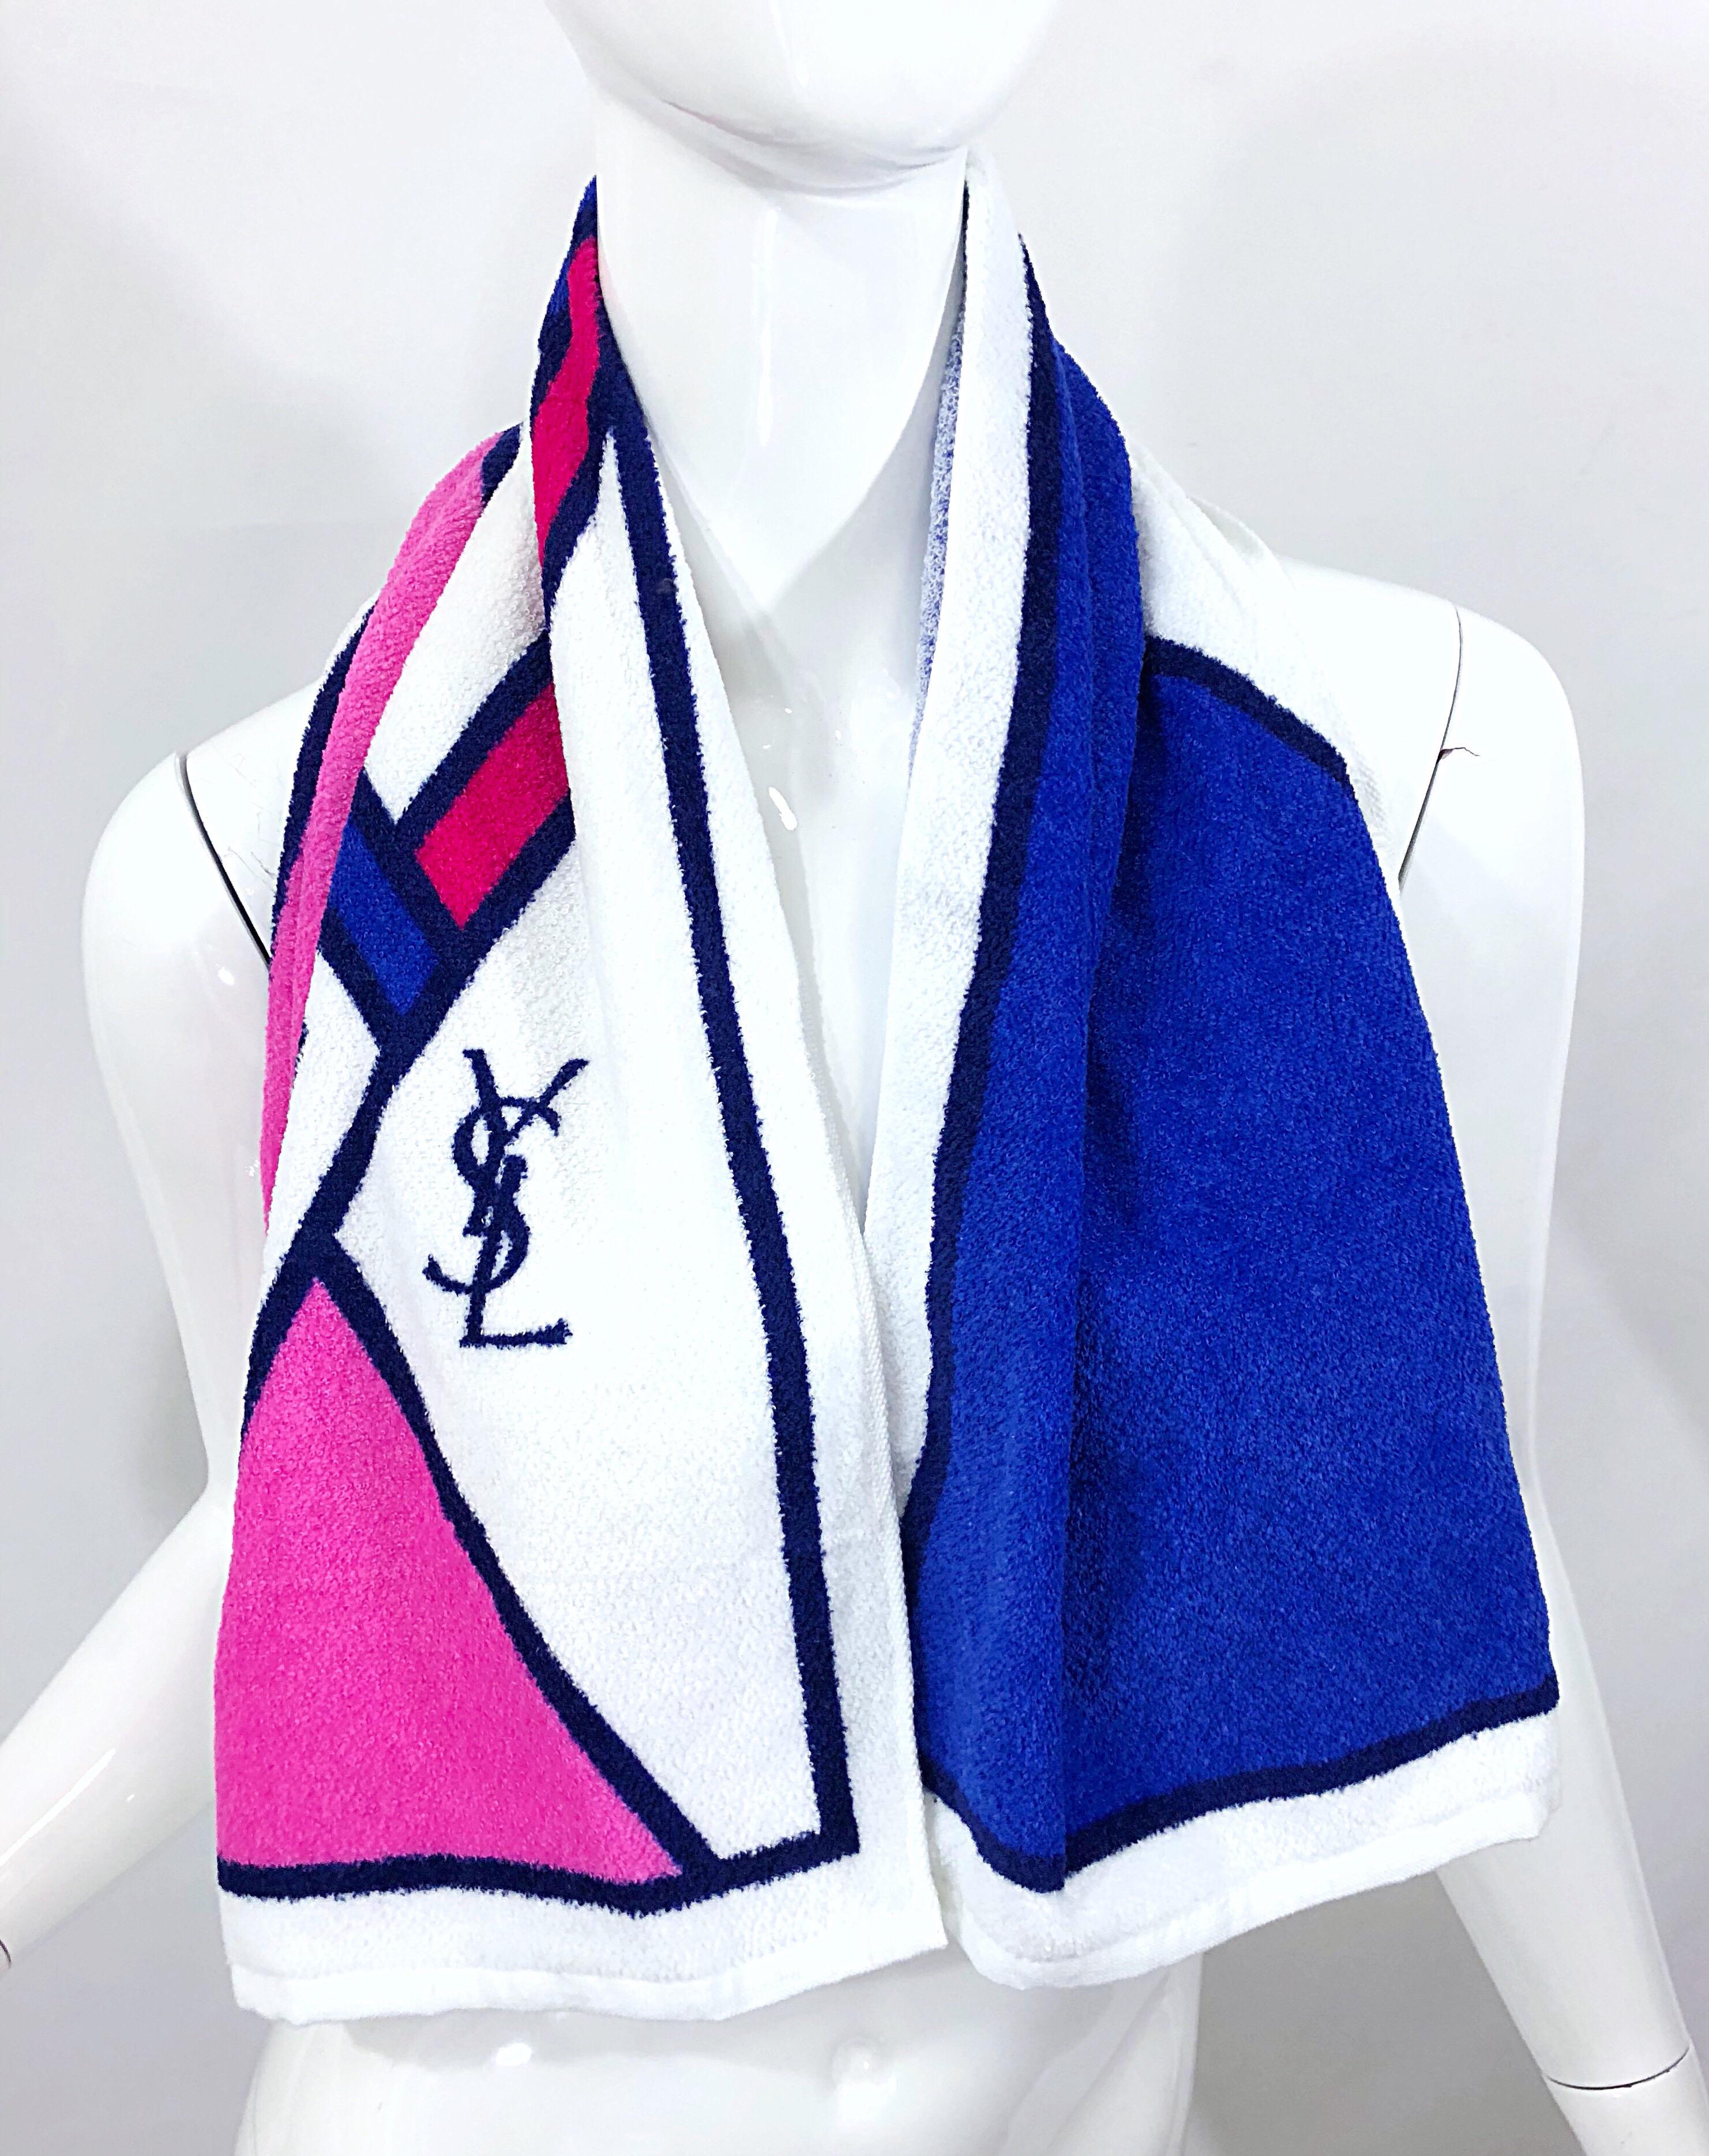 Brand new never worn vintage YVES SAINT LAURENT pink,  purple and white logo workout towel! Step up your gym game with this statement piece! Tired of sporting LuLu Lemon at the gym? Spice up your gym wardrobe with this rare gem! In great unworn